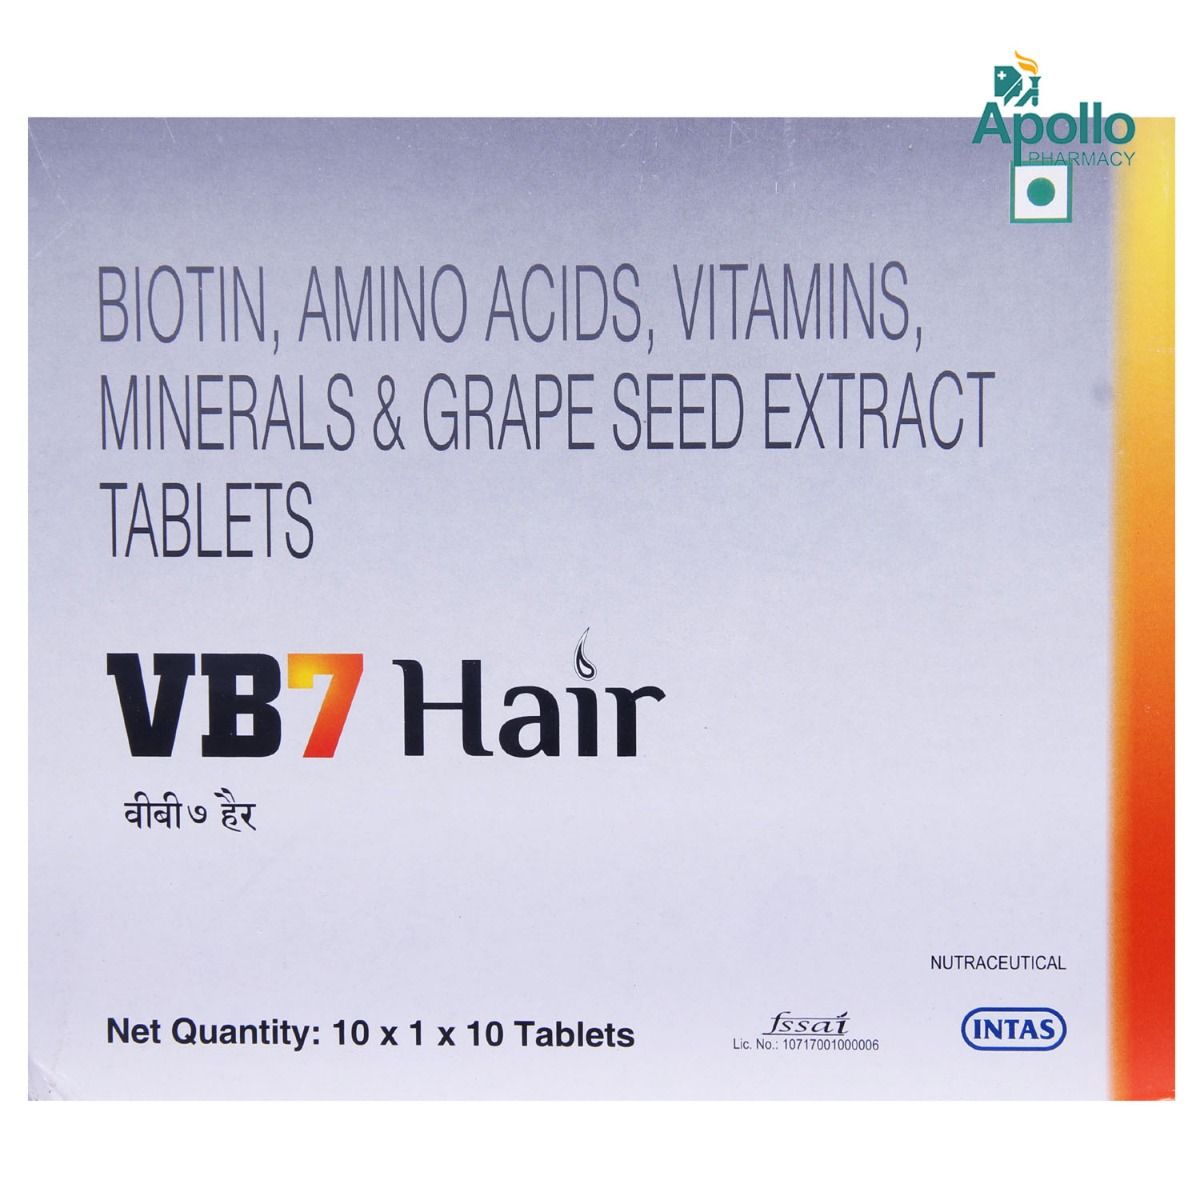 VB7 Hair Tablet 10's Price, Uses, Side Effects, Composition - Apollo  Pharmacy